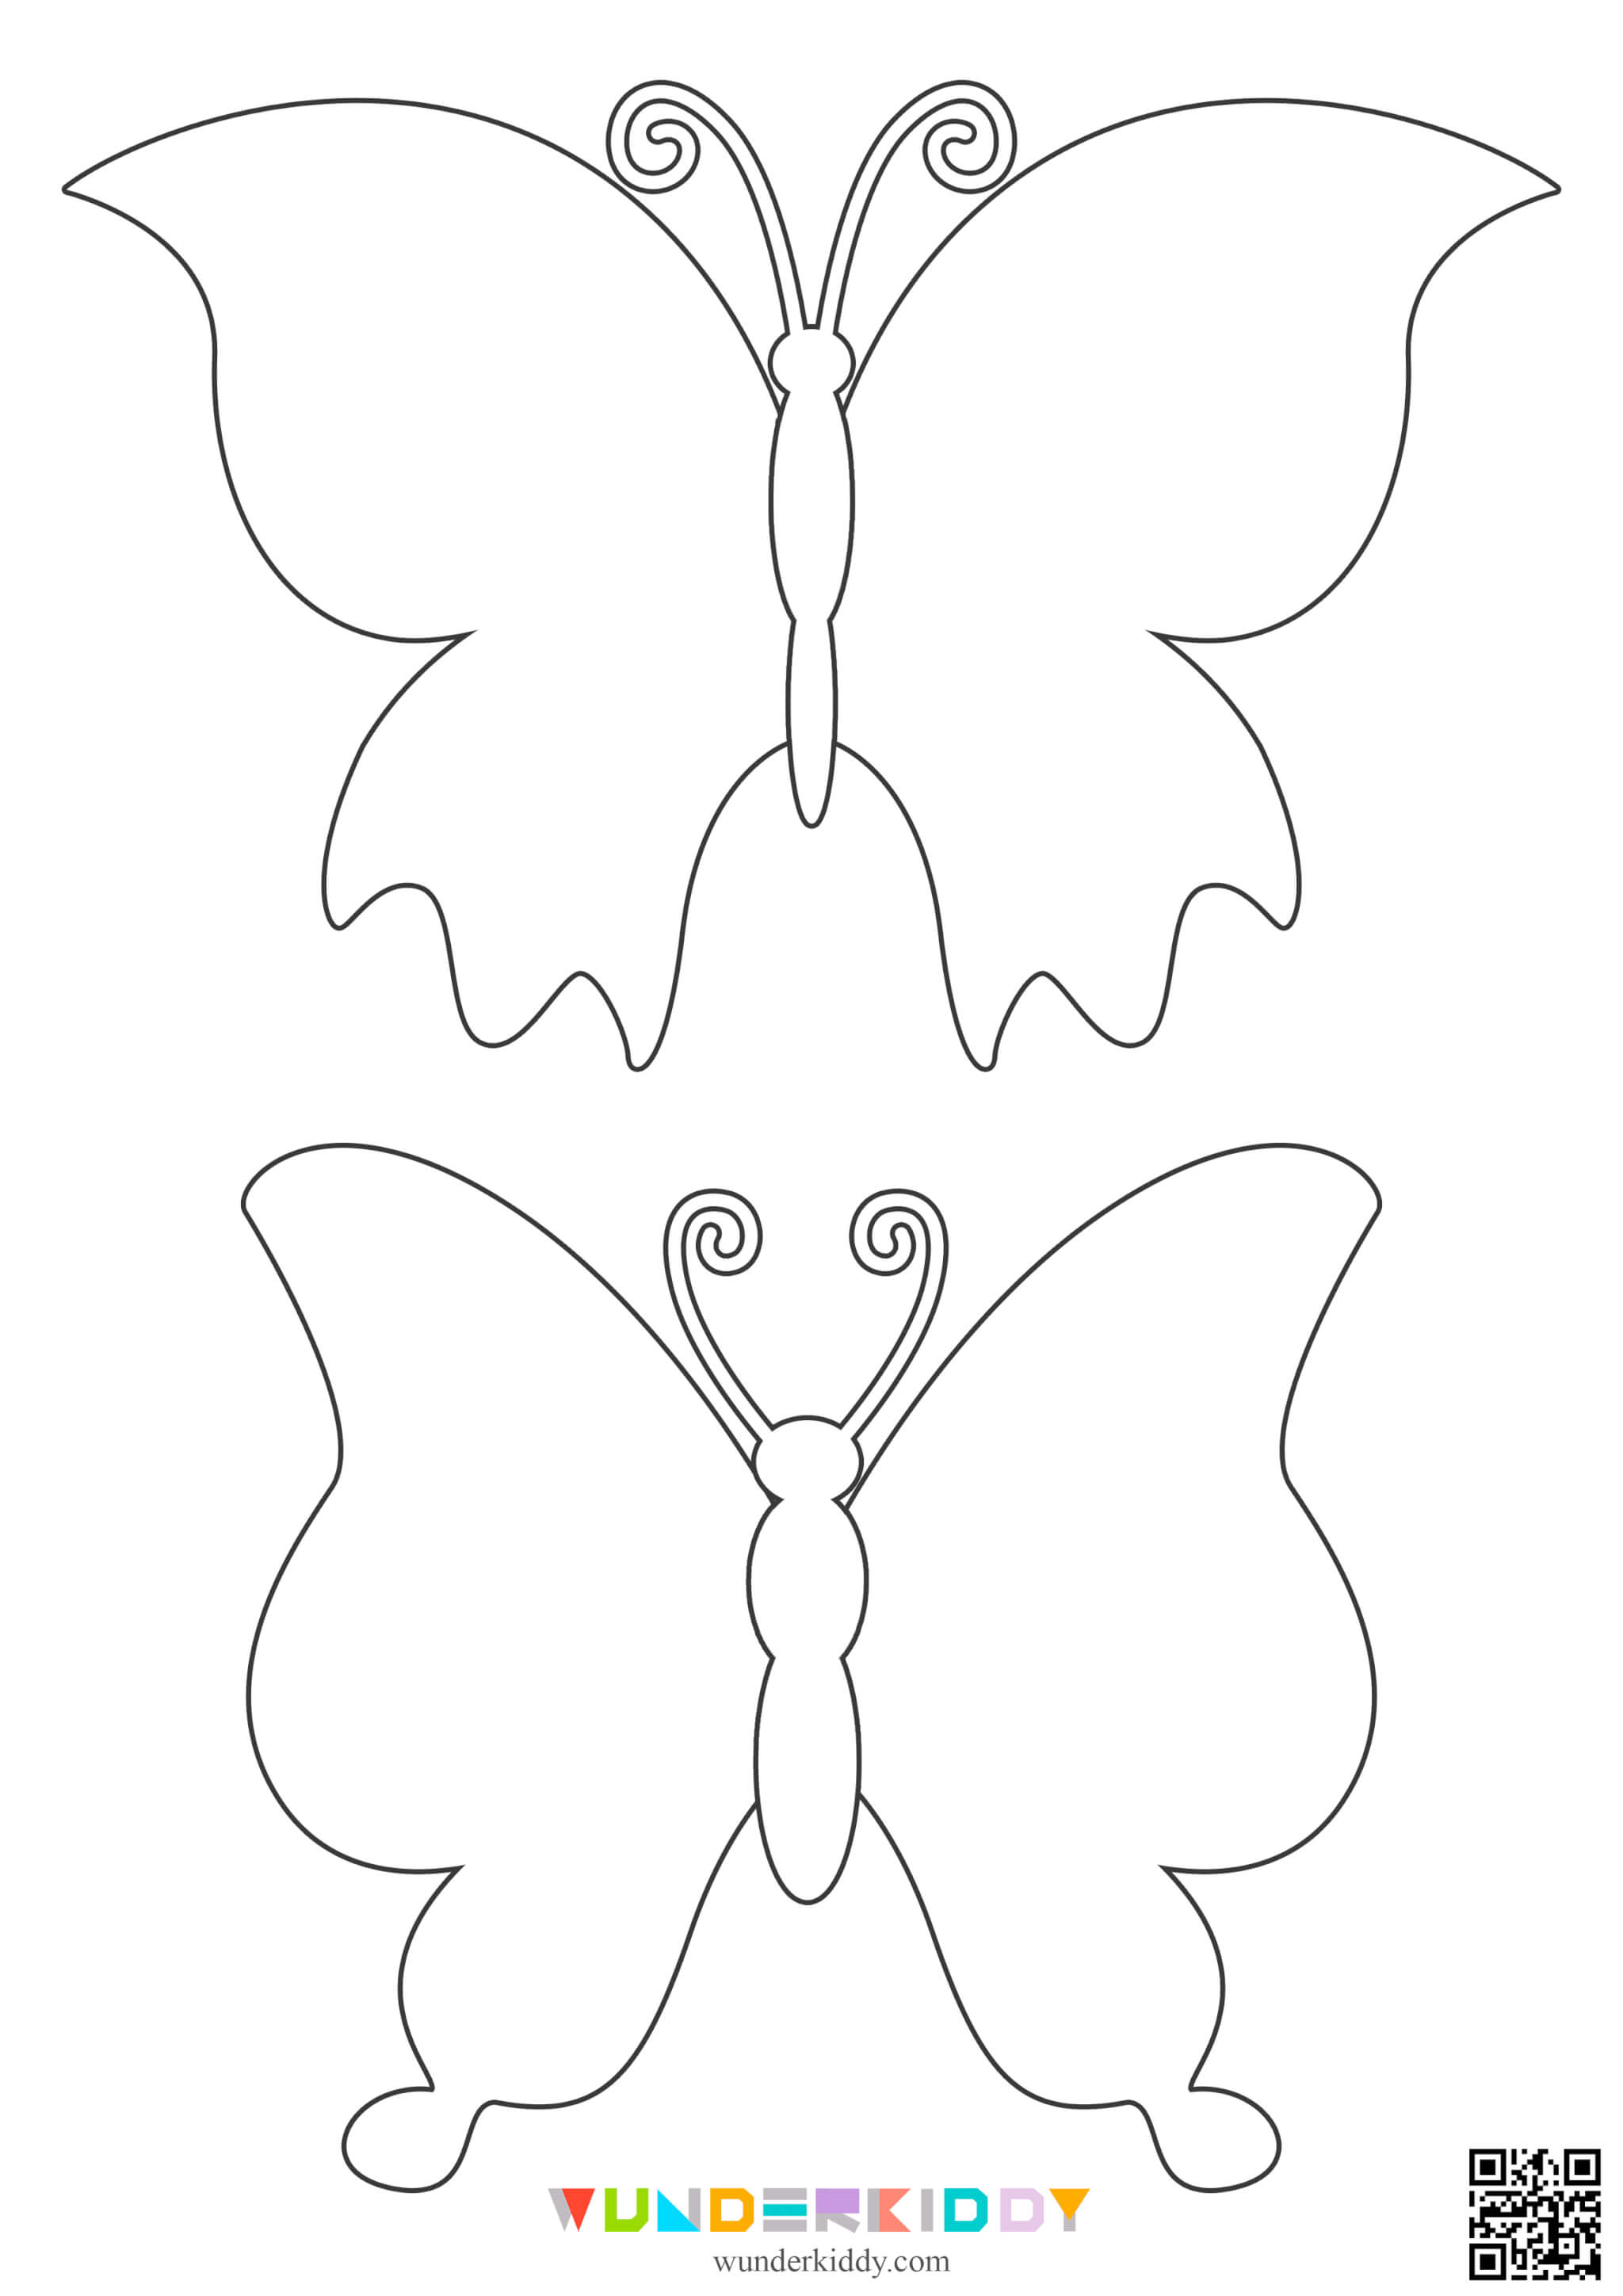 Free Printable Butterfly Templates - Image 7